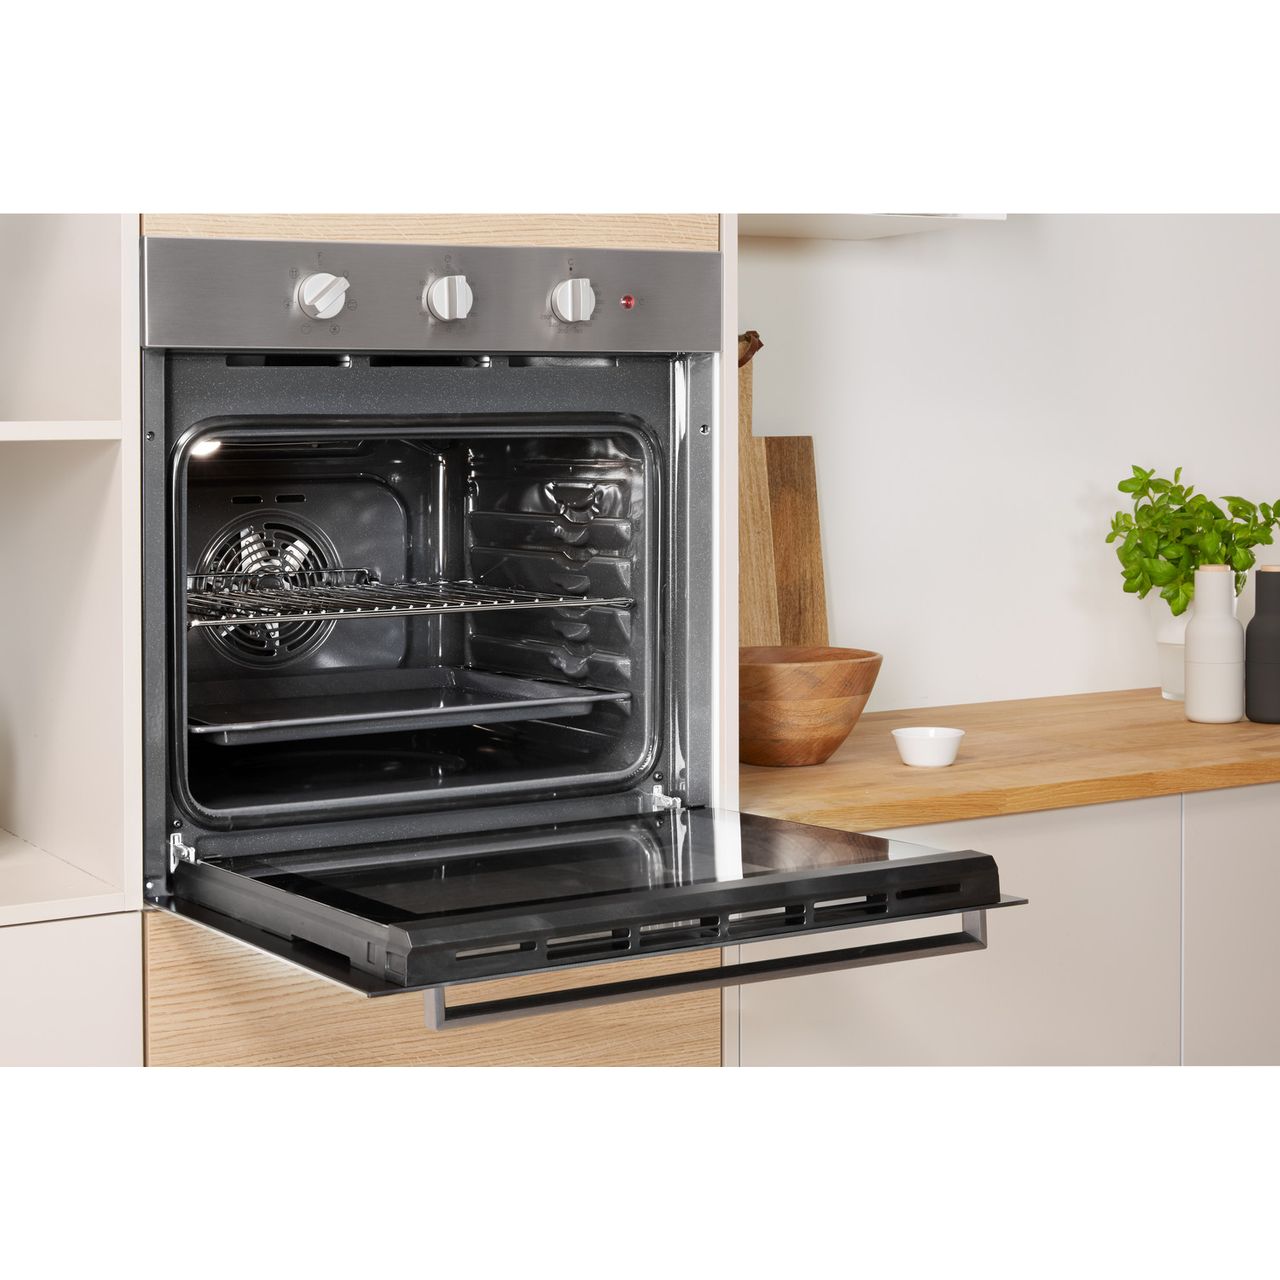 overdrive moden Hare IFW6330IX_SS | Indesit built-in single oven | ao.com